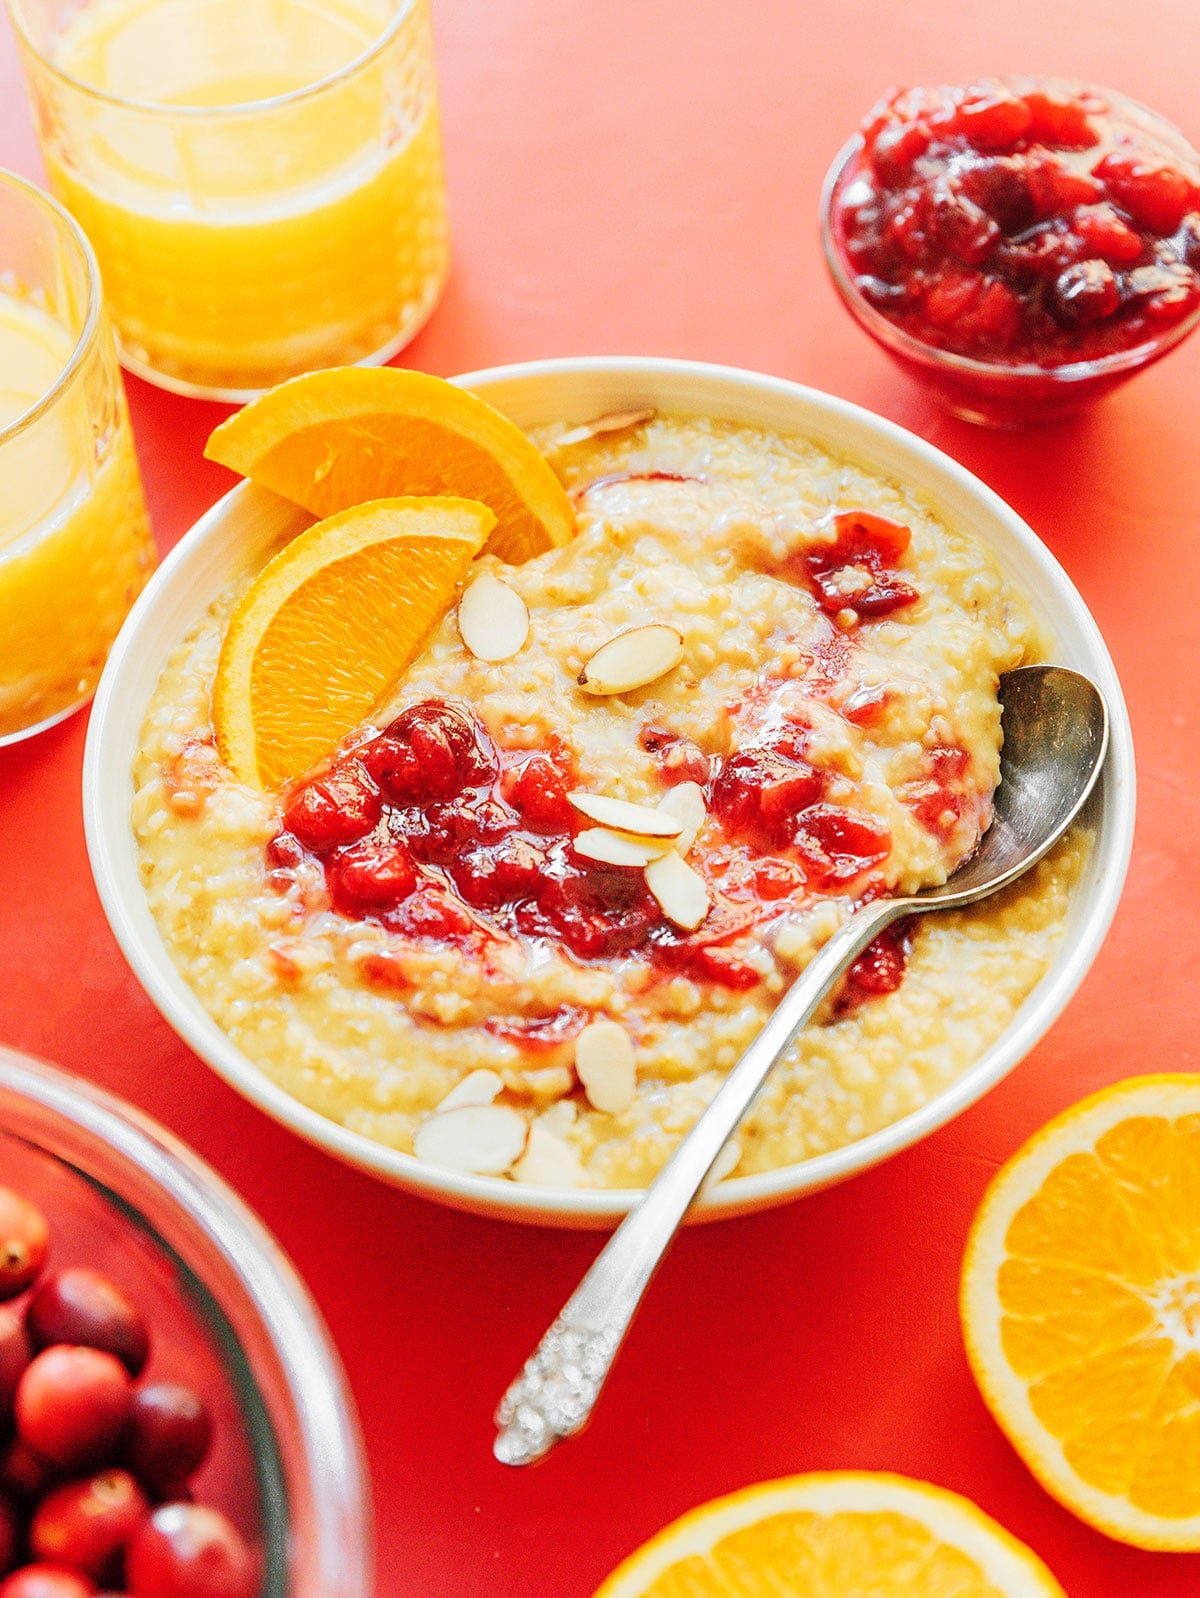 A white bowl filled with cranberry orange oatmeal garnished with sliced almonds and orange slices